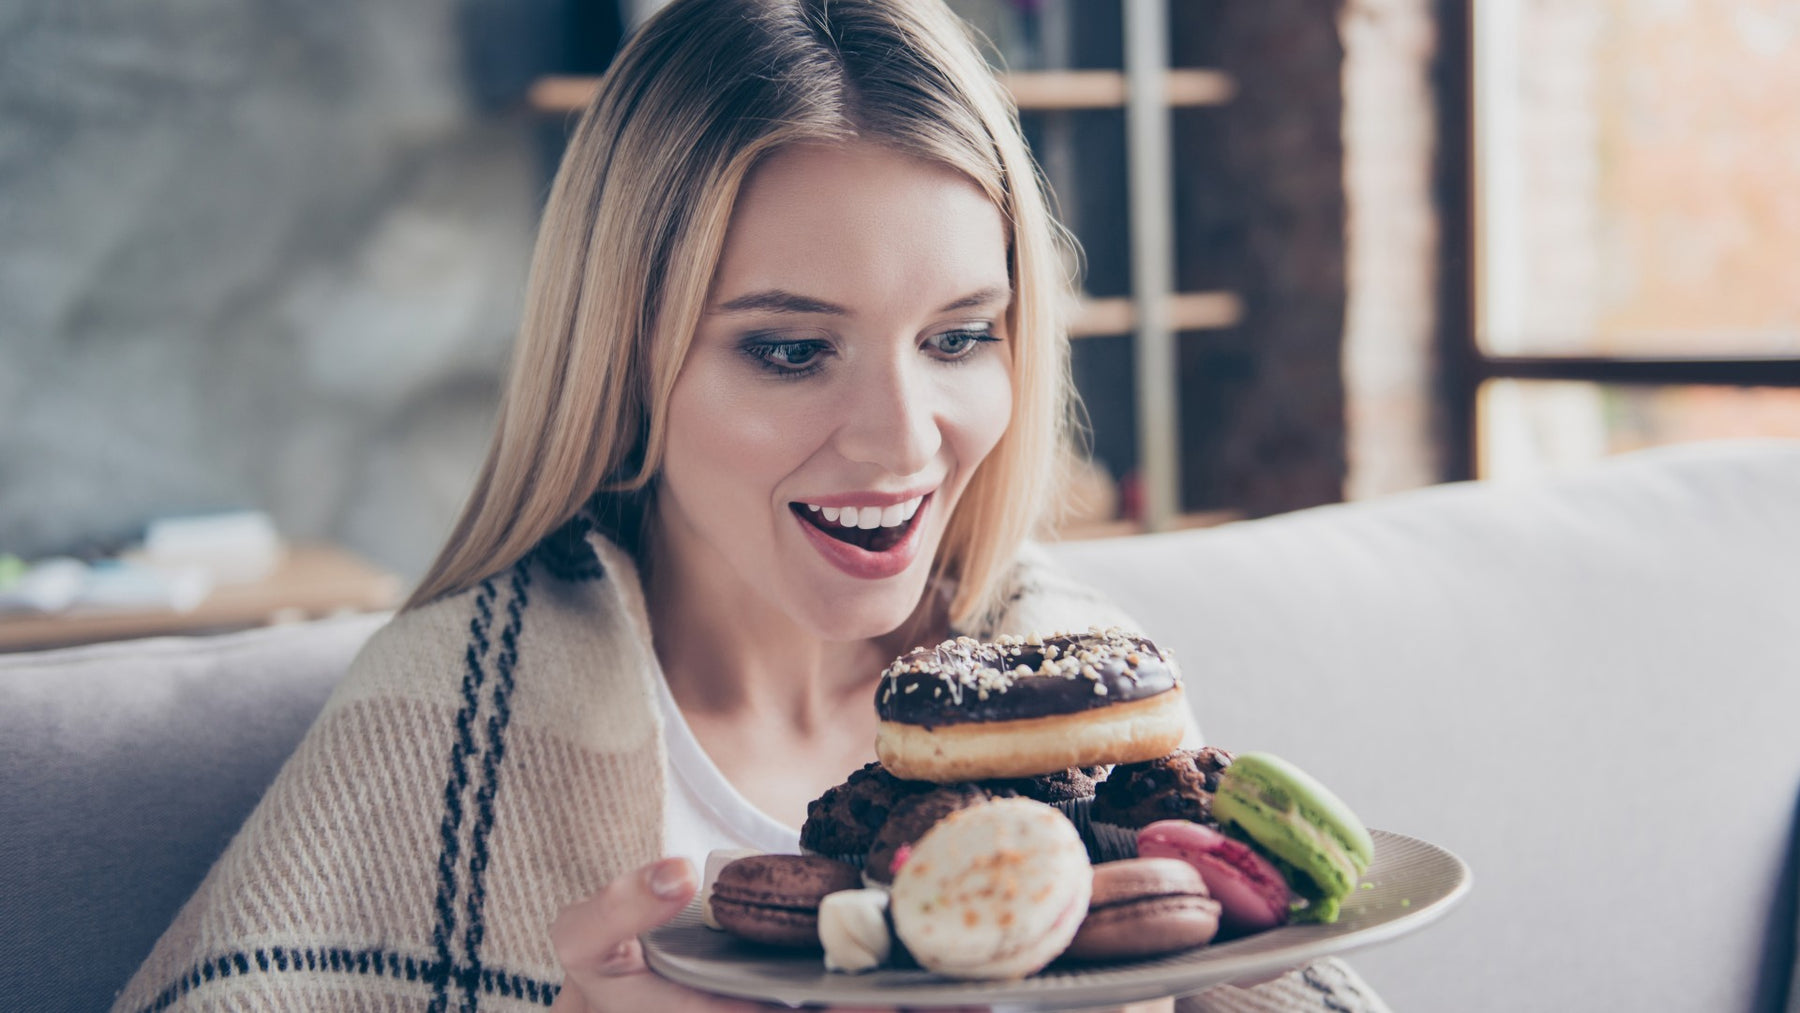 5 Reasons to Lose Weight by Eating What You Love